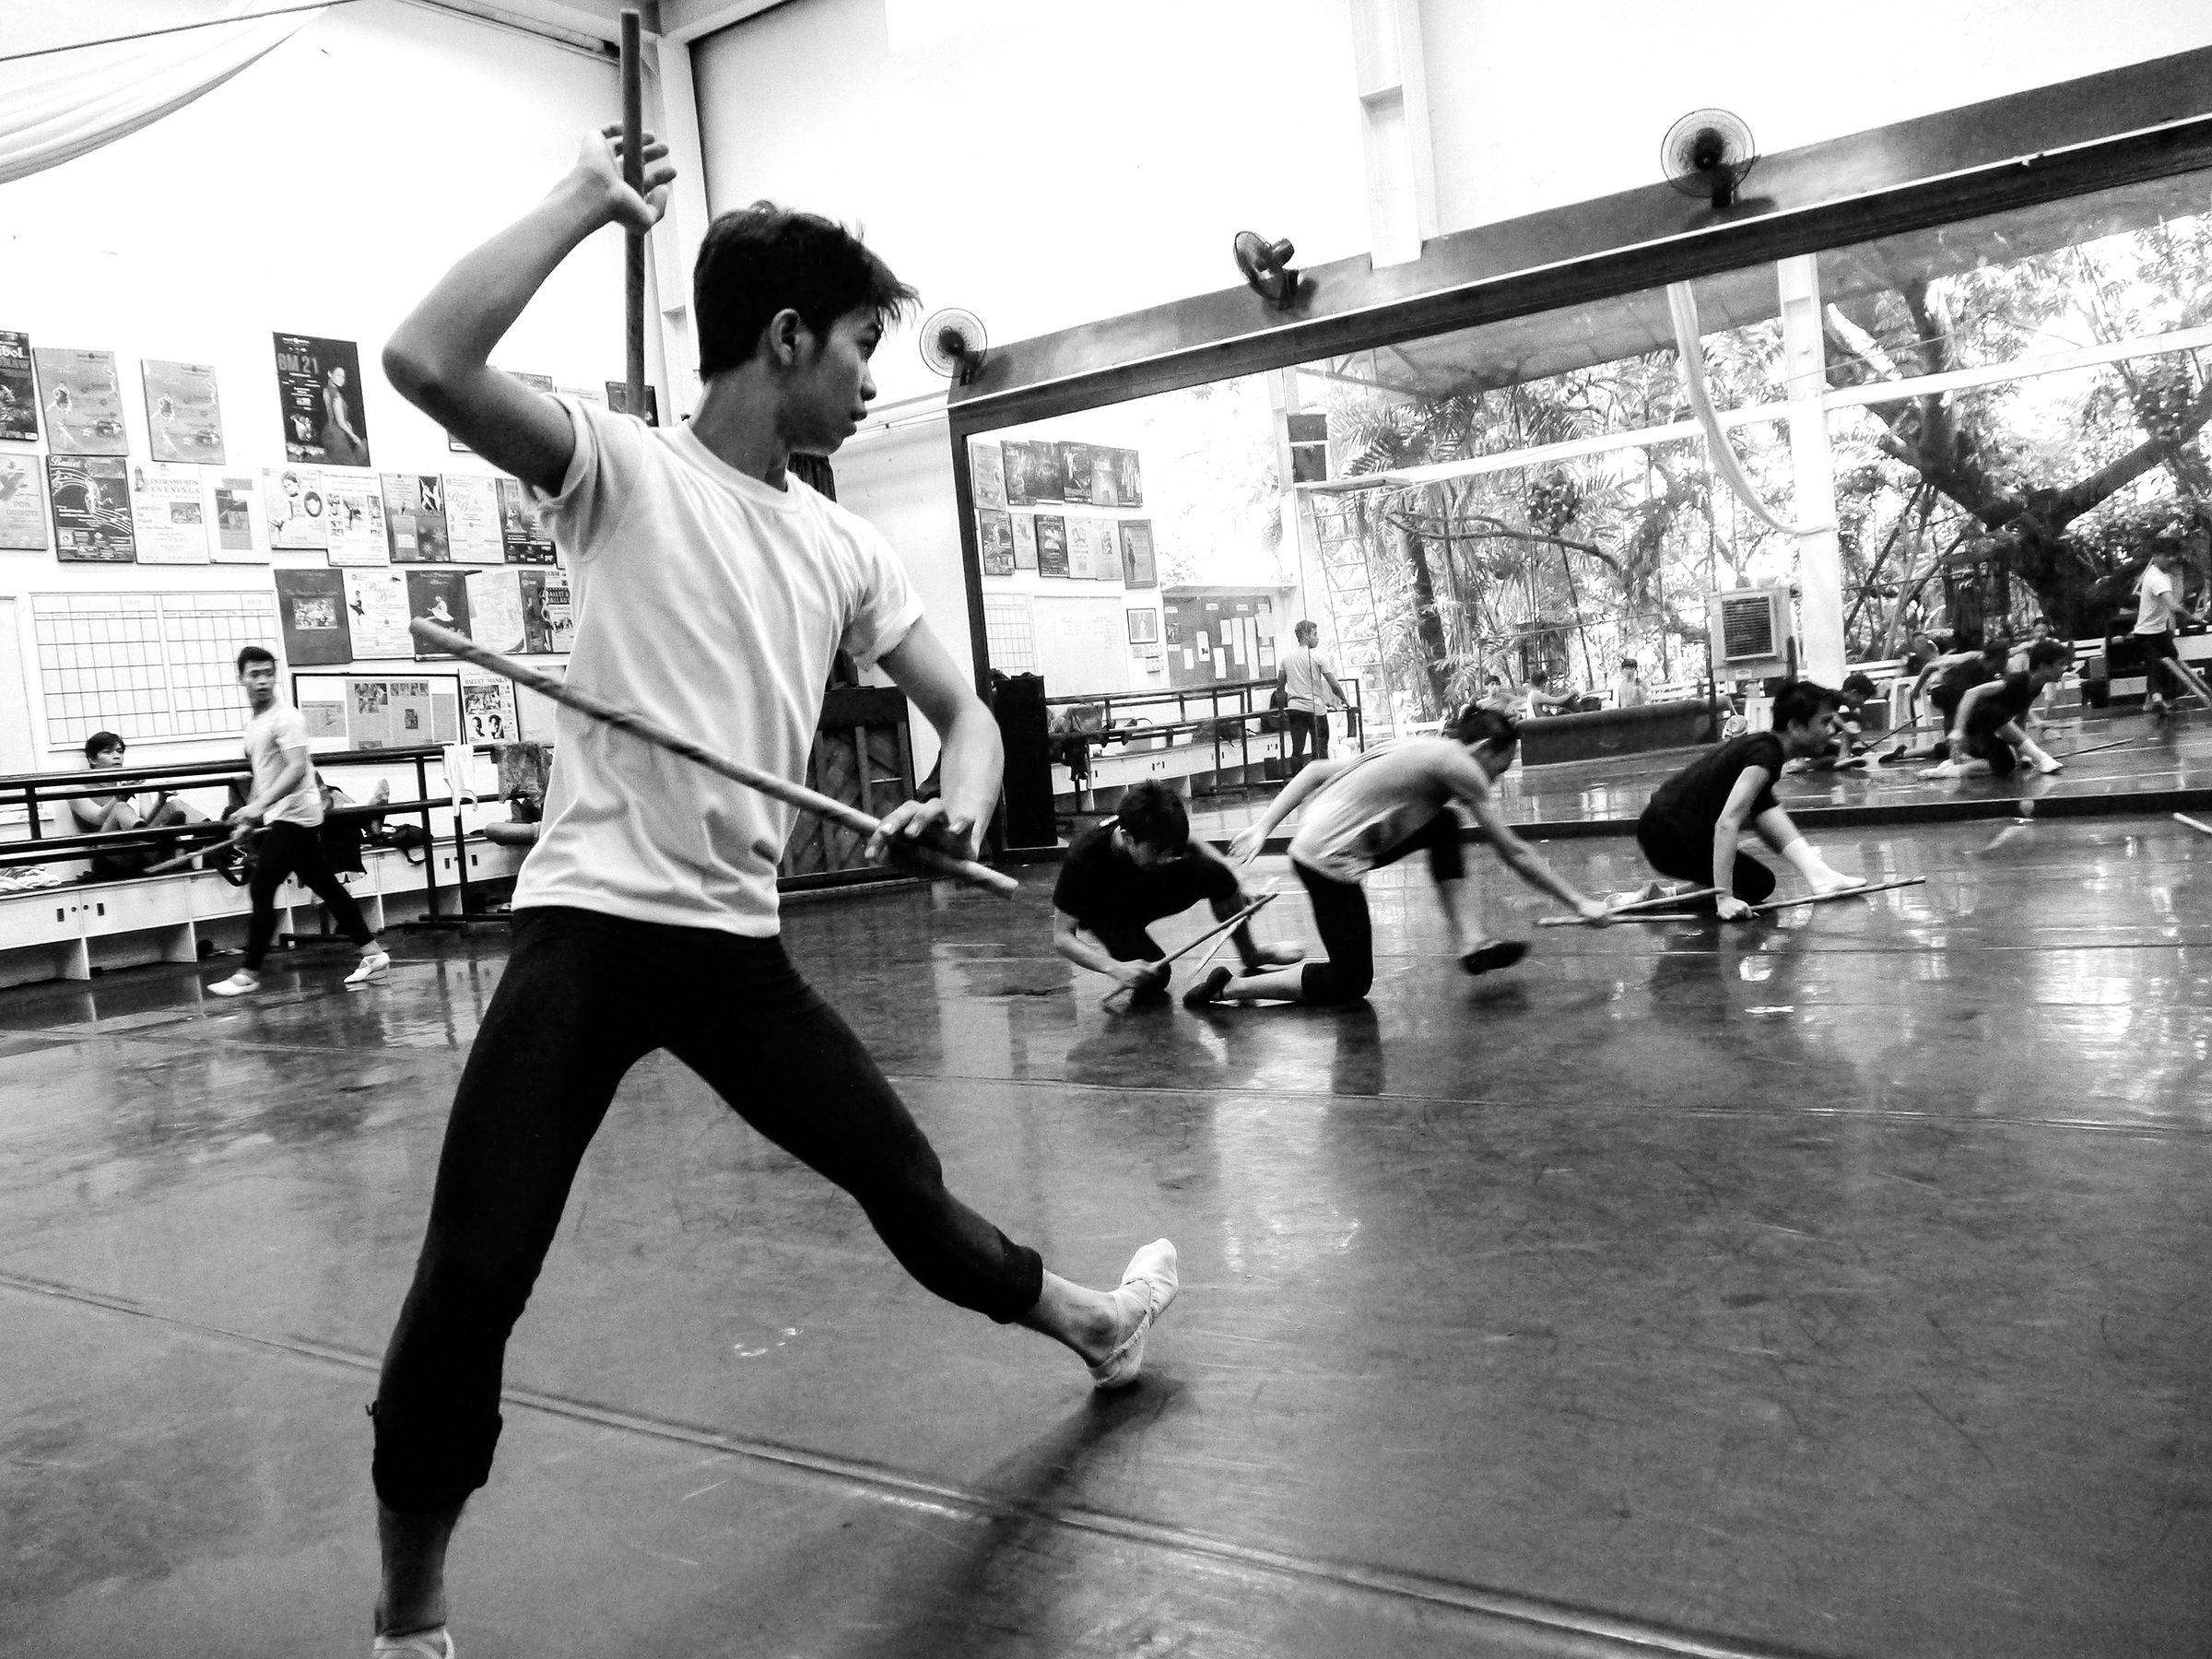 Choreography in Focus - Arnis by Ric Culalic 3d - Ballet Manila Archives.jpg